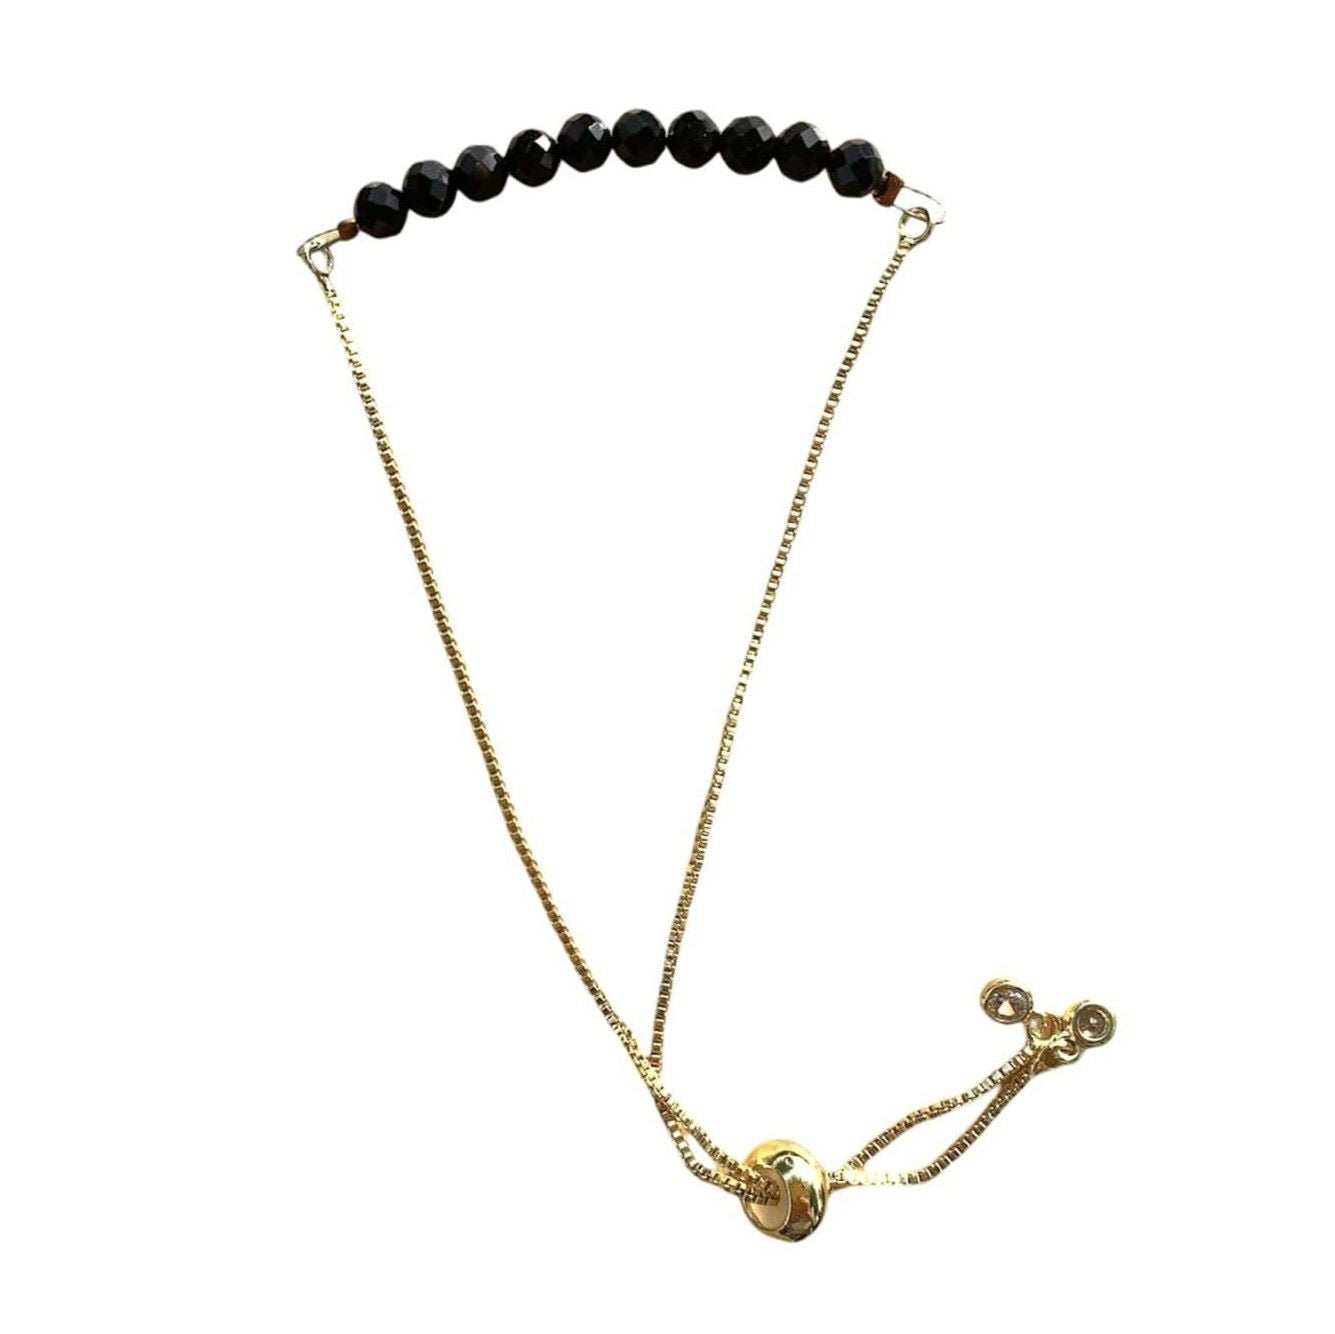 Black Onyx Bracelet Faceted Round Beads with Adjustable Chain